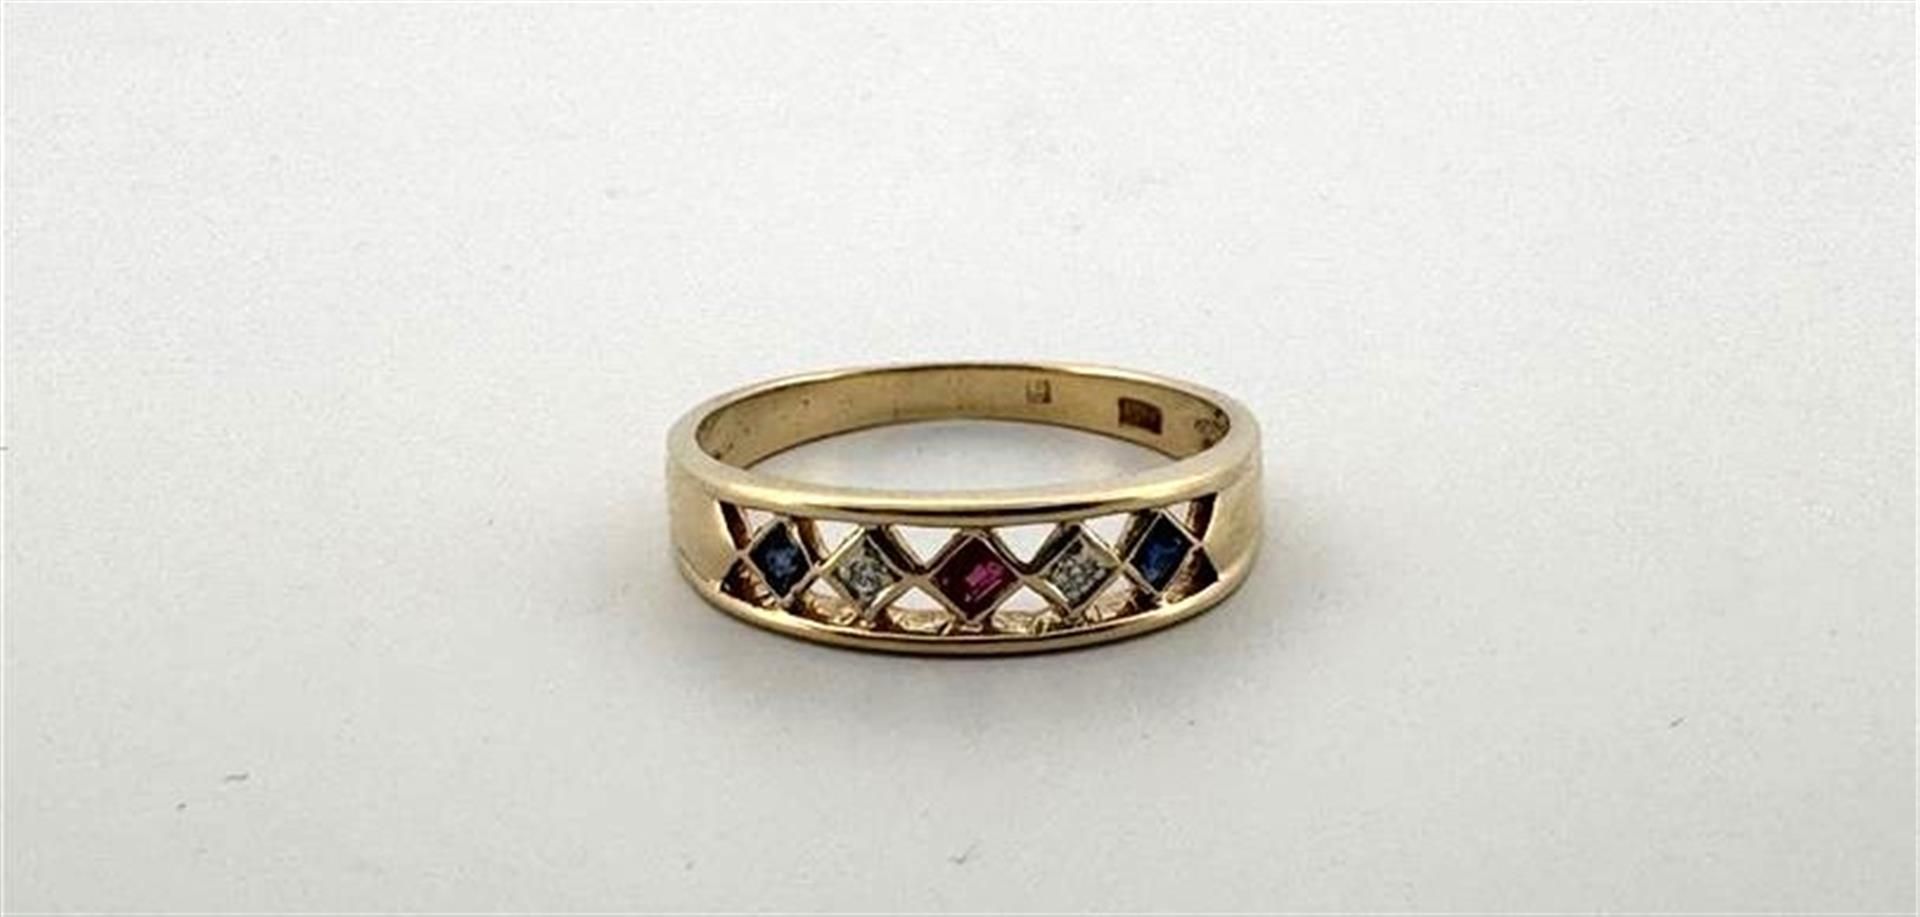 14kt yellow gold ring set with ruby, sapphire and diamond.
The ring is set with 1 princess cut ruby 